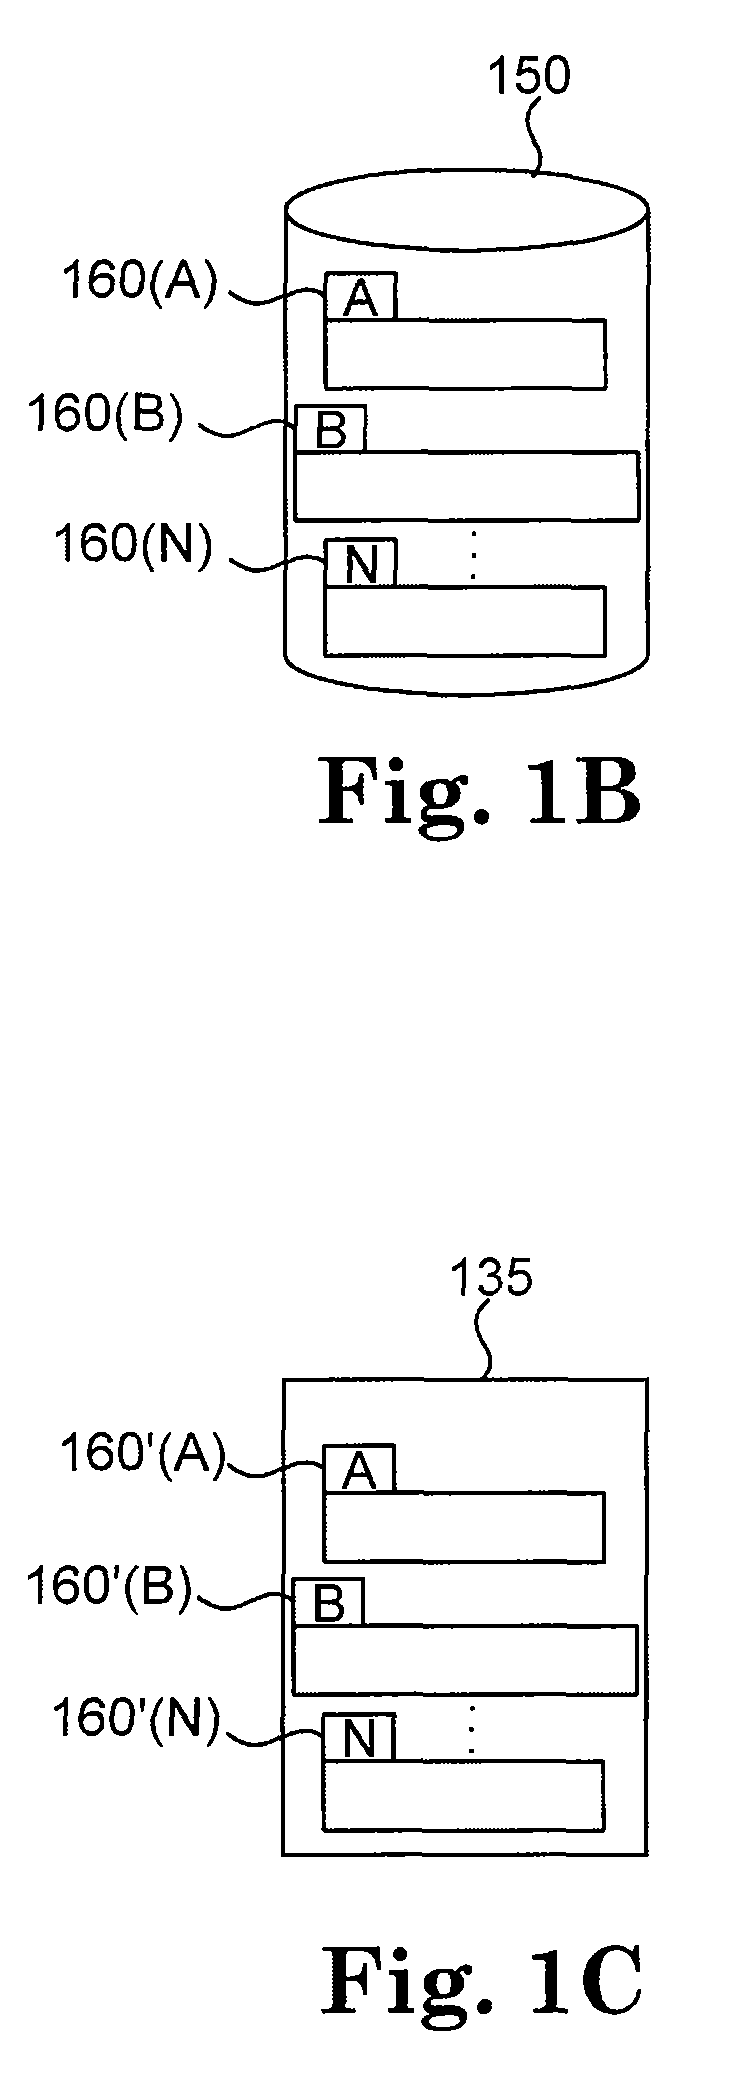 Method and system for assuring integrity of deduplicated data